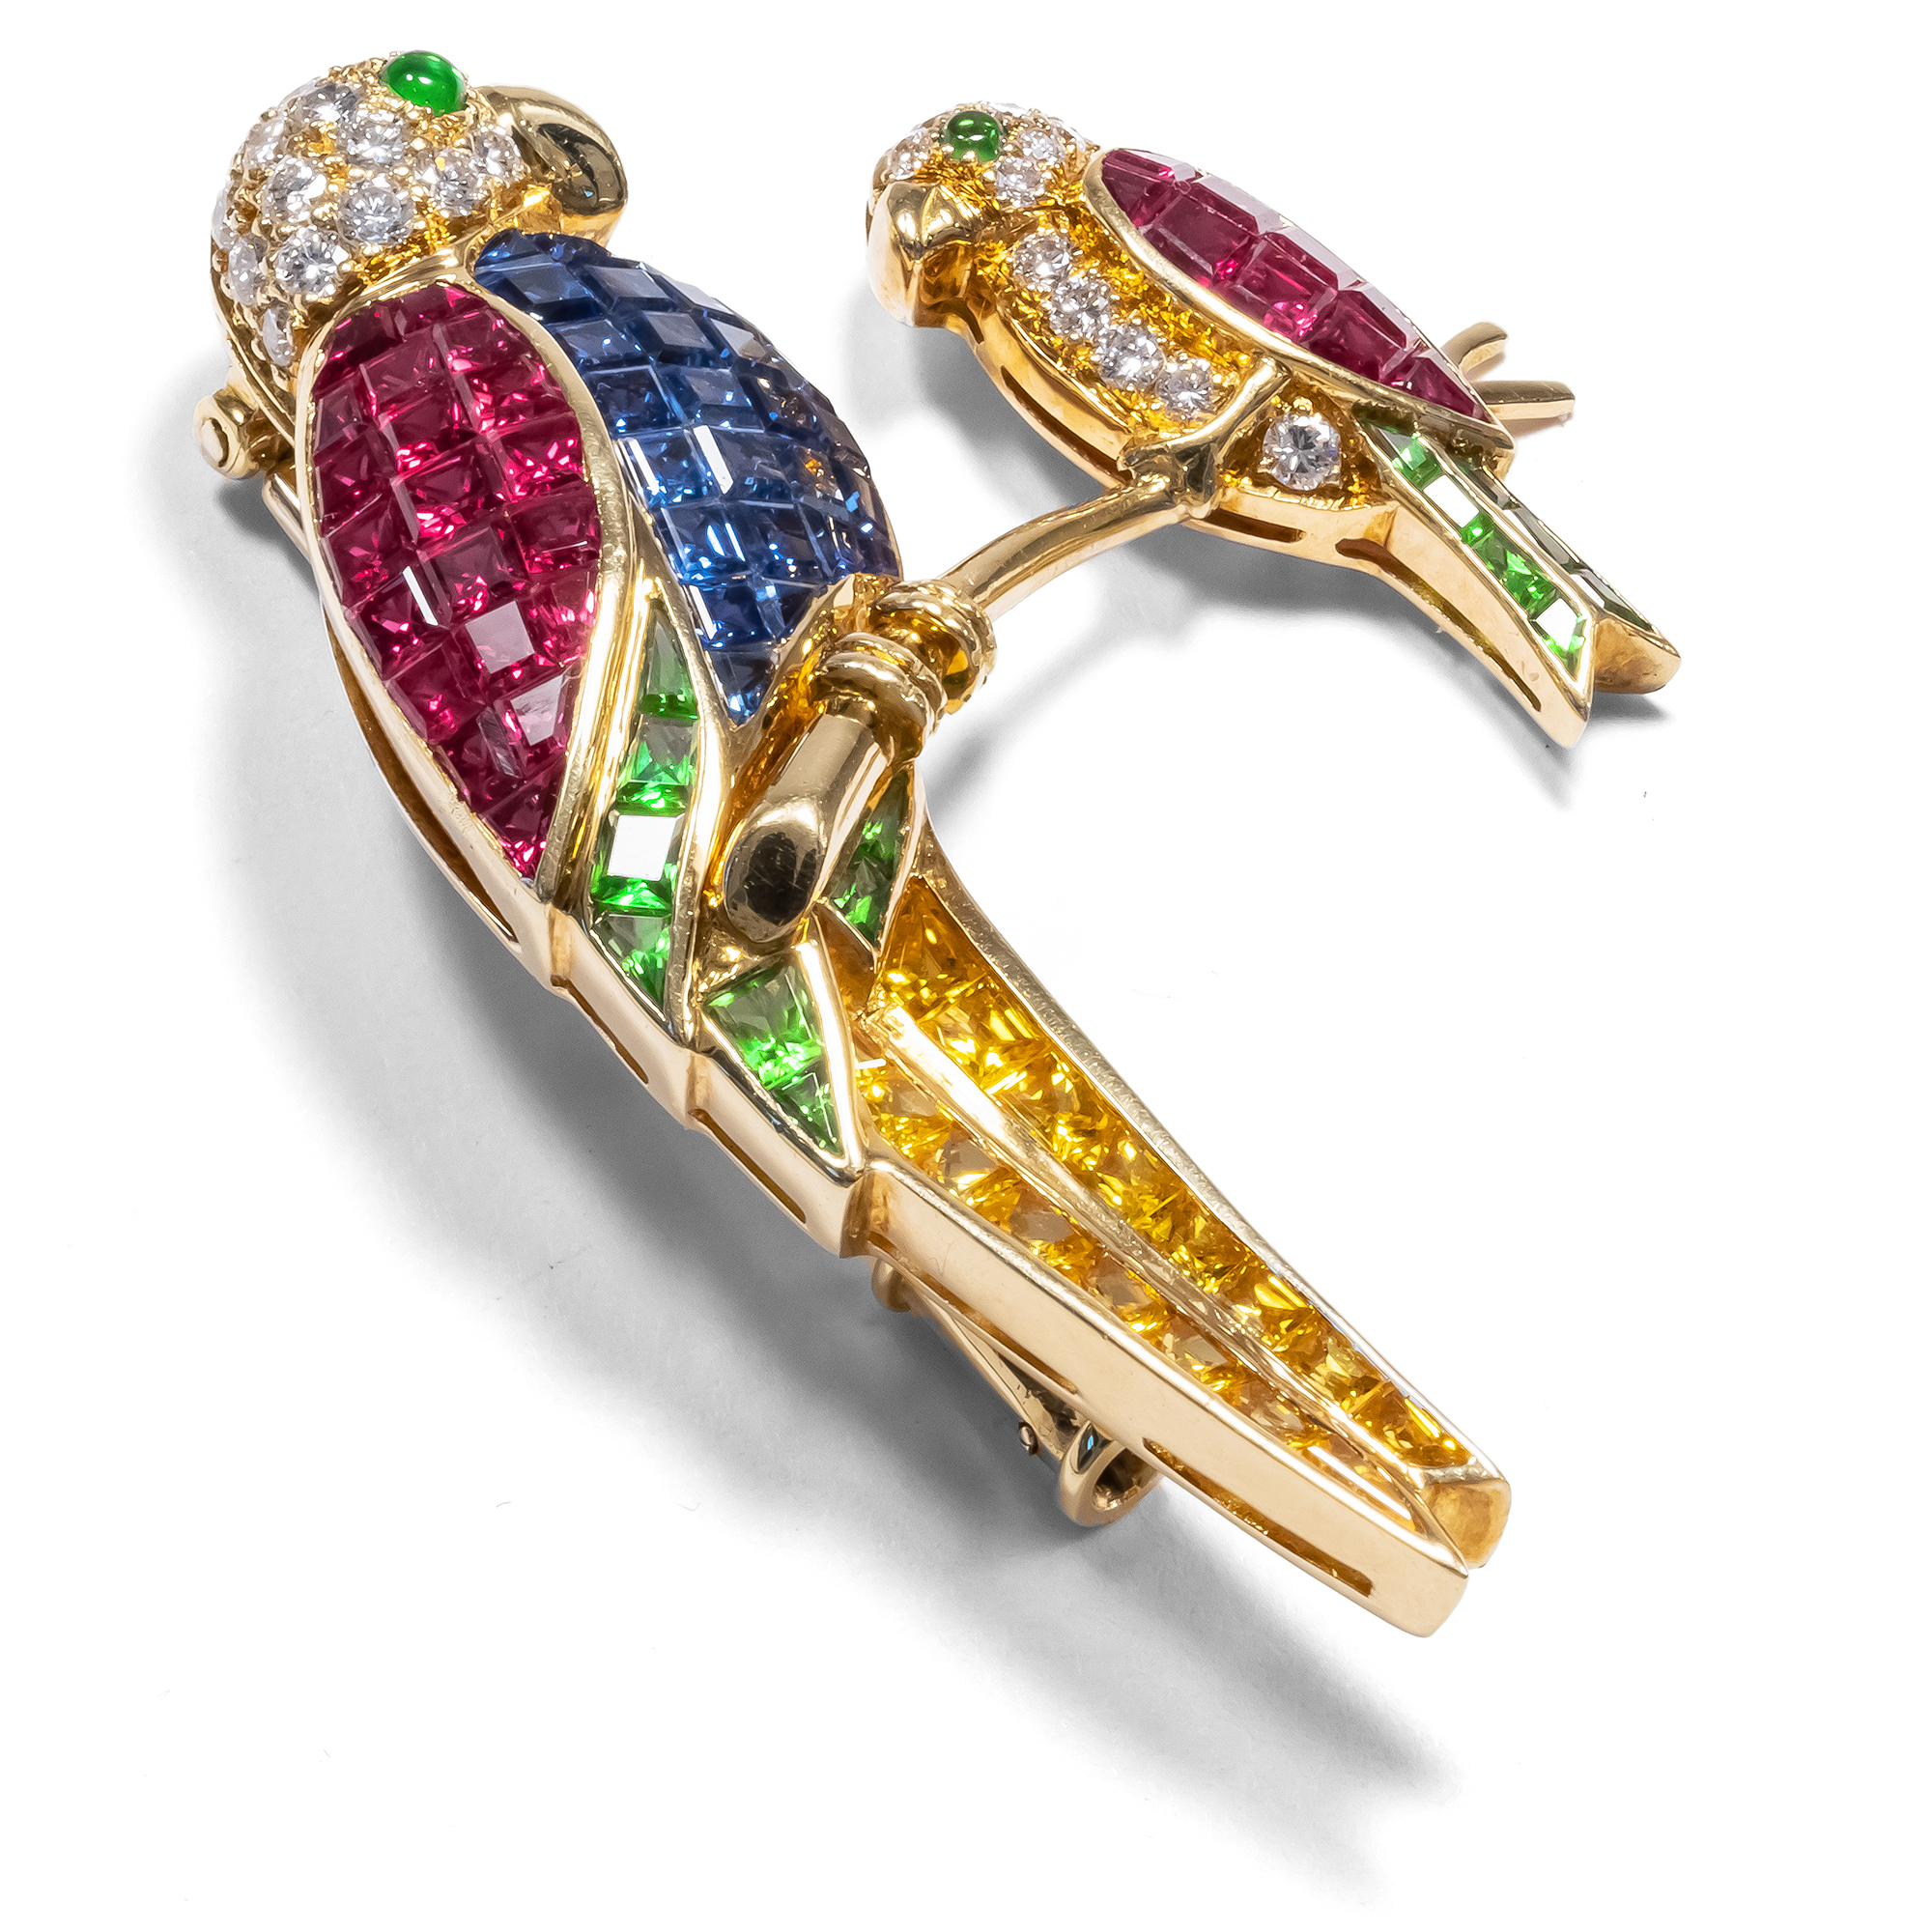 Marvellous Diamond & Colored Stone Brooch In "Mystery Setting", ca. 1985